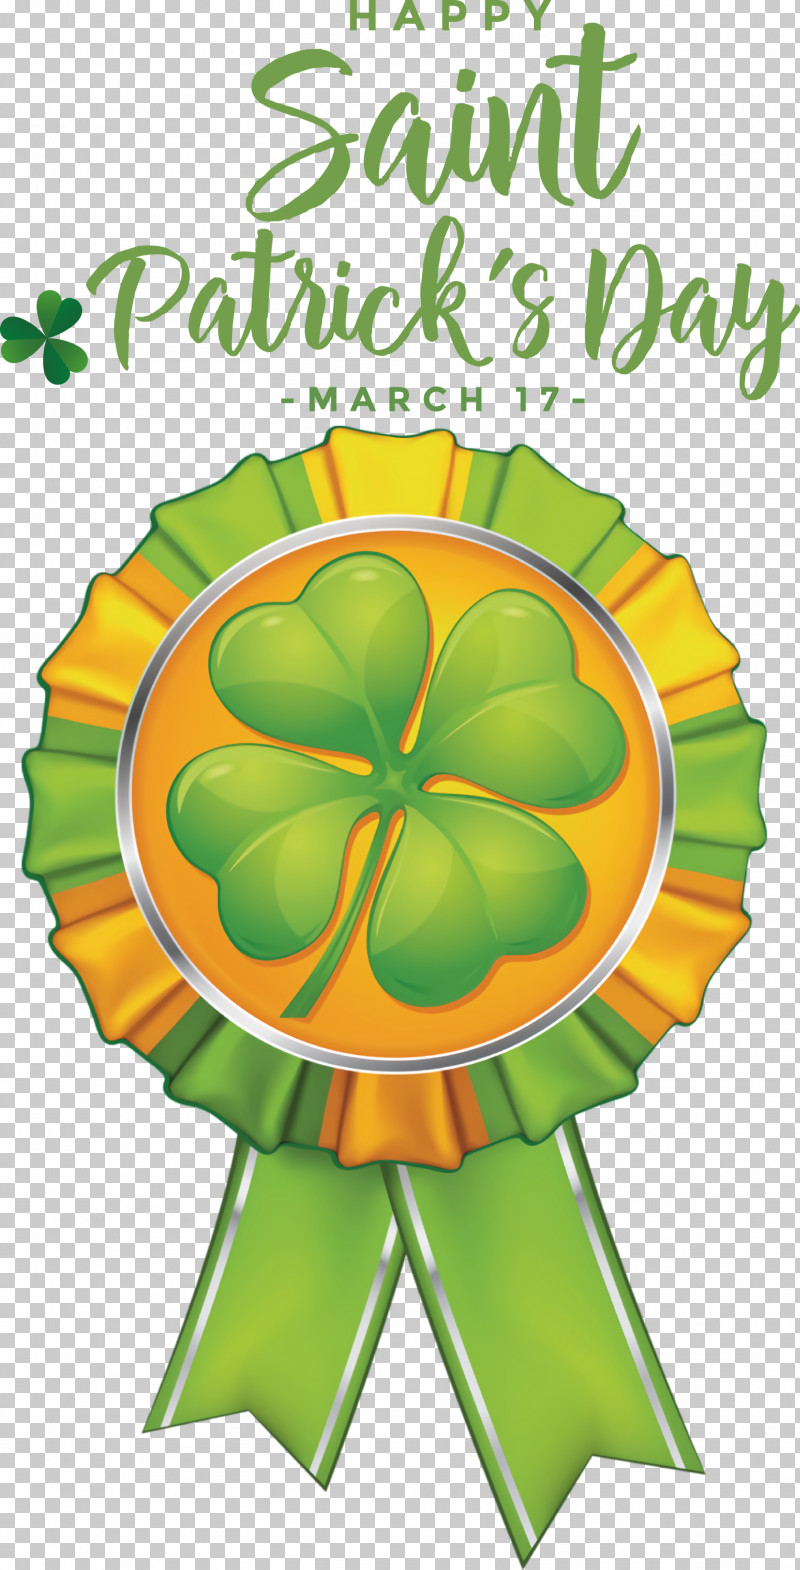 St Patricks Day Saint Patrick Happy Patricks Day PNG, Clipart, Award, Badge, Clover, Fourleaf Clover, Green Free PNG Download